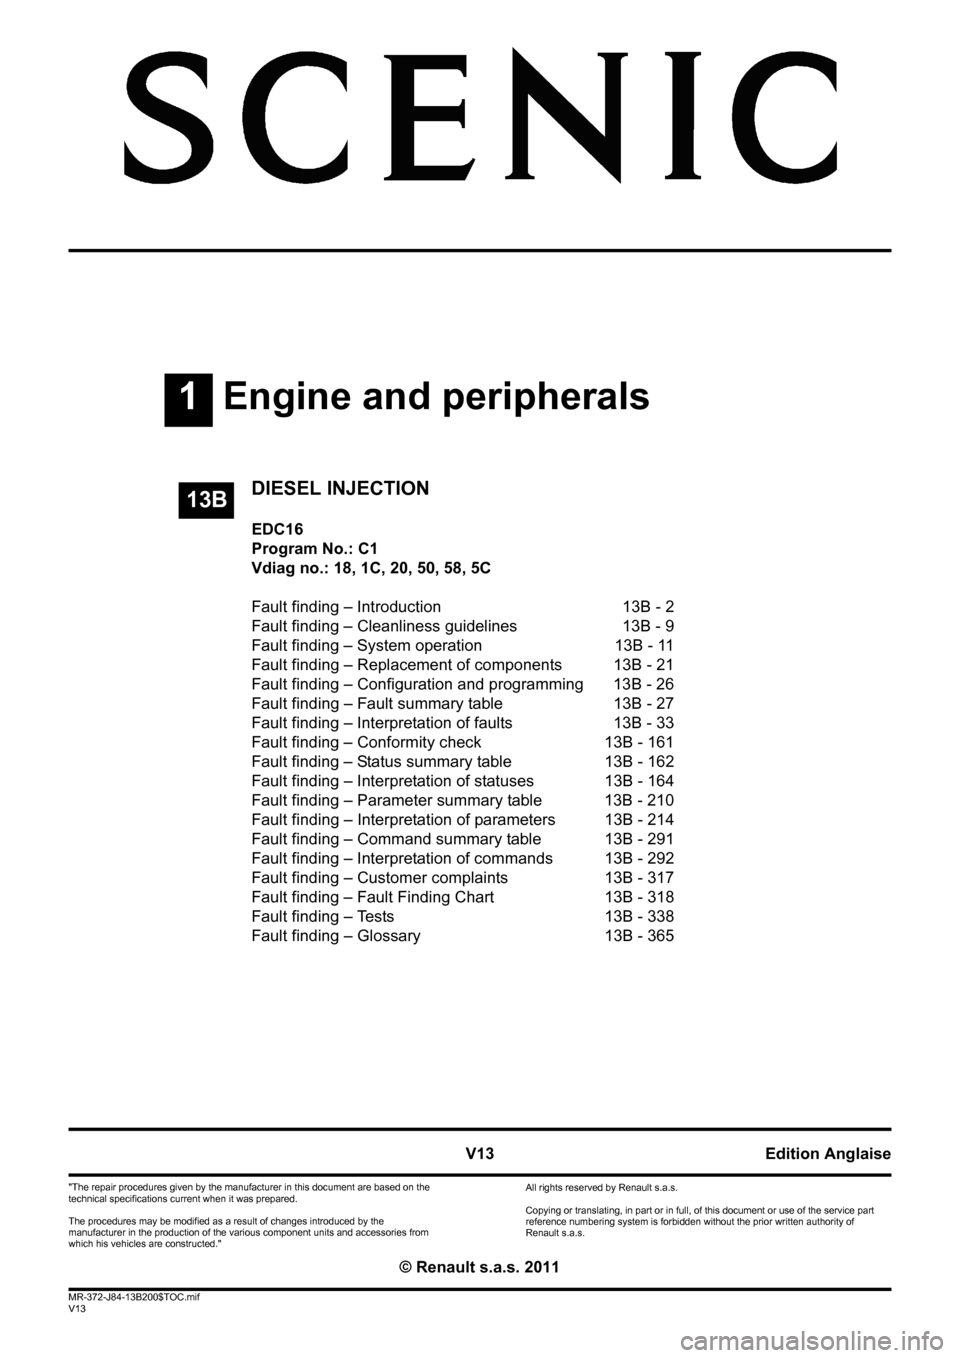 RENAULT SCENIC 2011 J95 / 3.G Engine And Peripherals EDC16 Workshop Manual 1Engine and peripherals
V13 MR-372-J84-13B200$TOC.mif
V13
13B
"The repair procedures given by the manufacturer in this document are based on the 
technical specifications current when it was prepared.